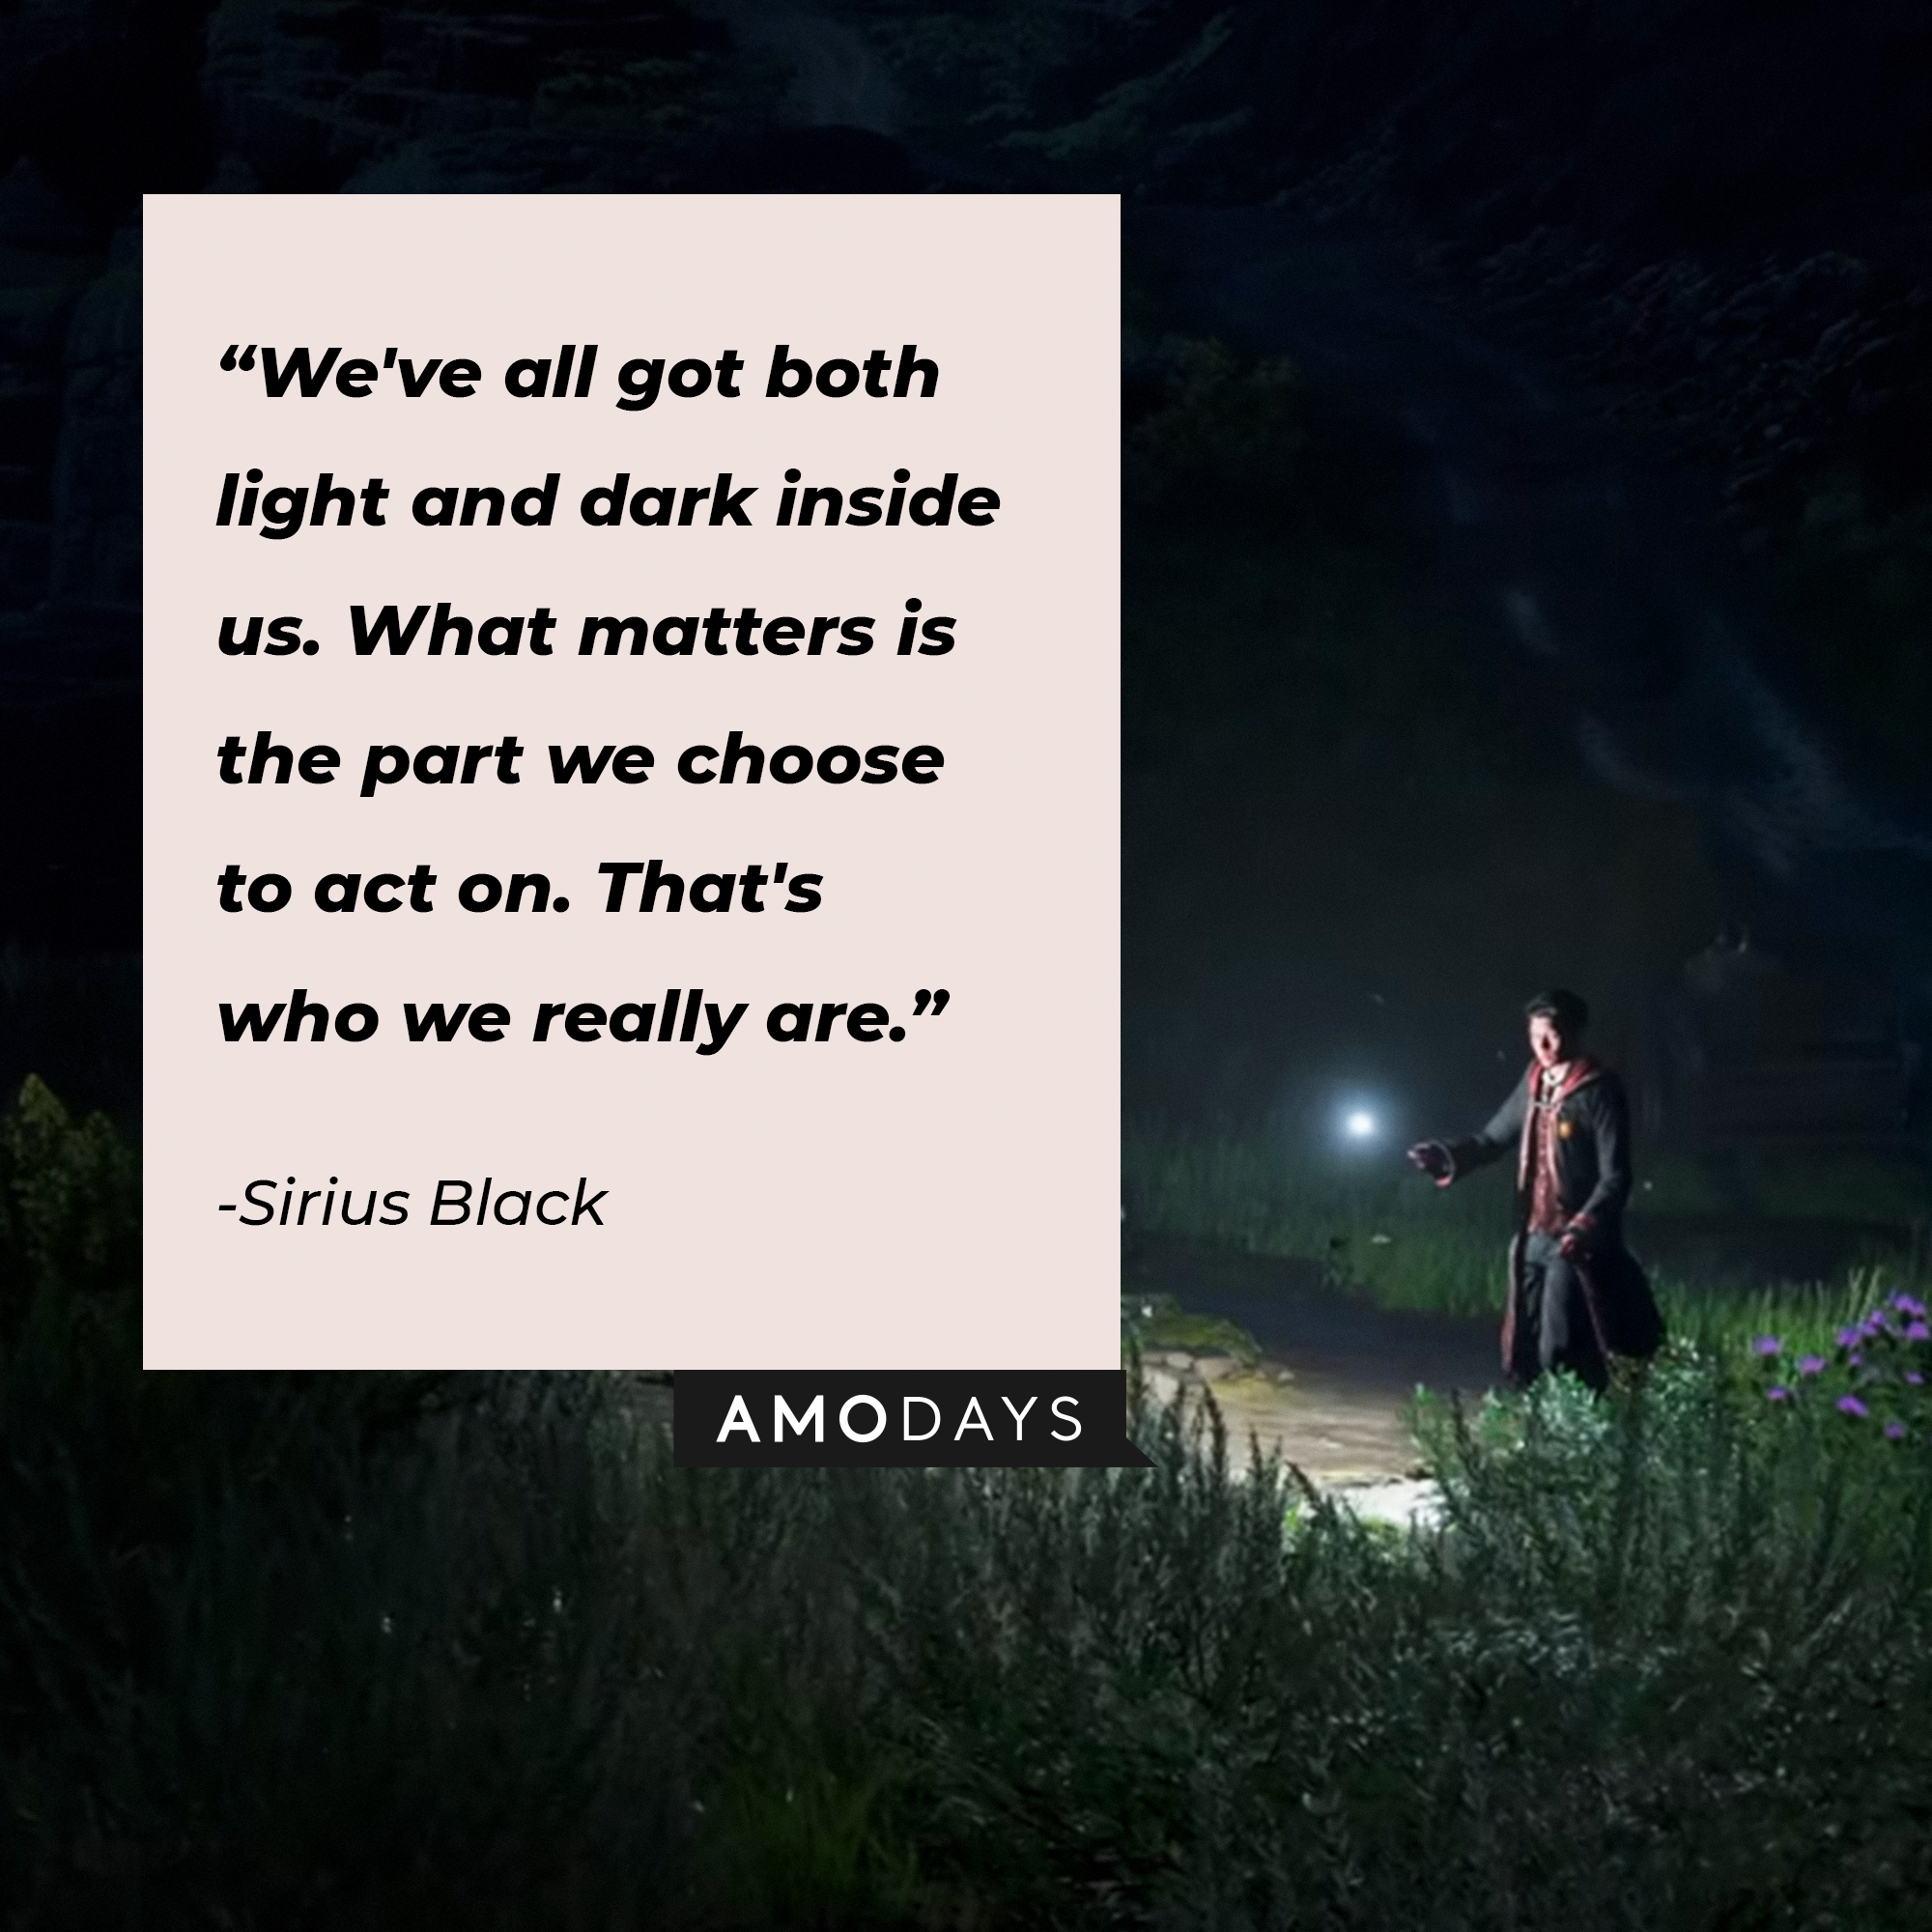 Sirius Black's quote: "We've all got both light and dark inside us. What matters is the part we choose to act on. That's who we really are." | Source: Youtube.com/HogwartsLegacy